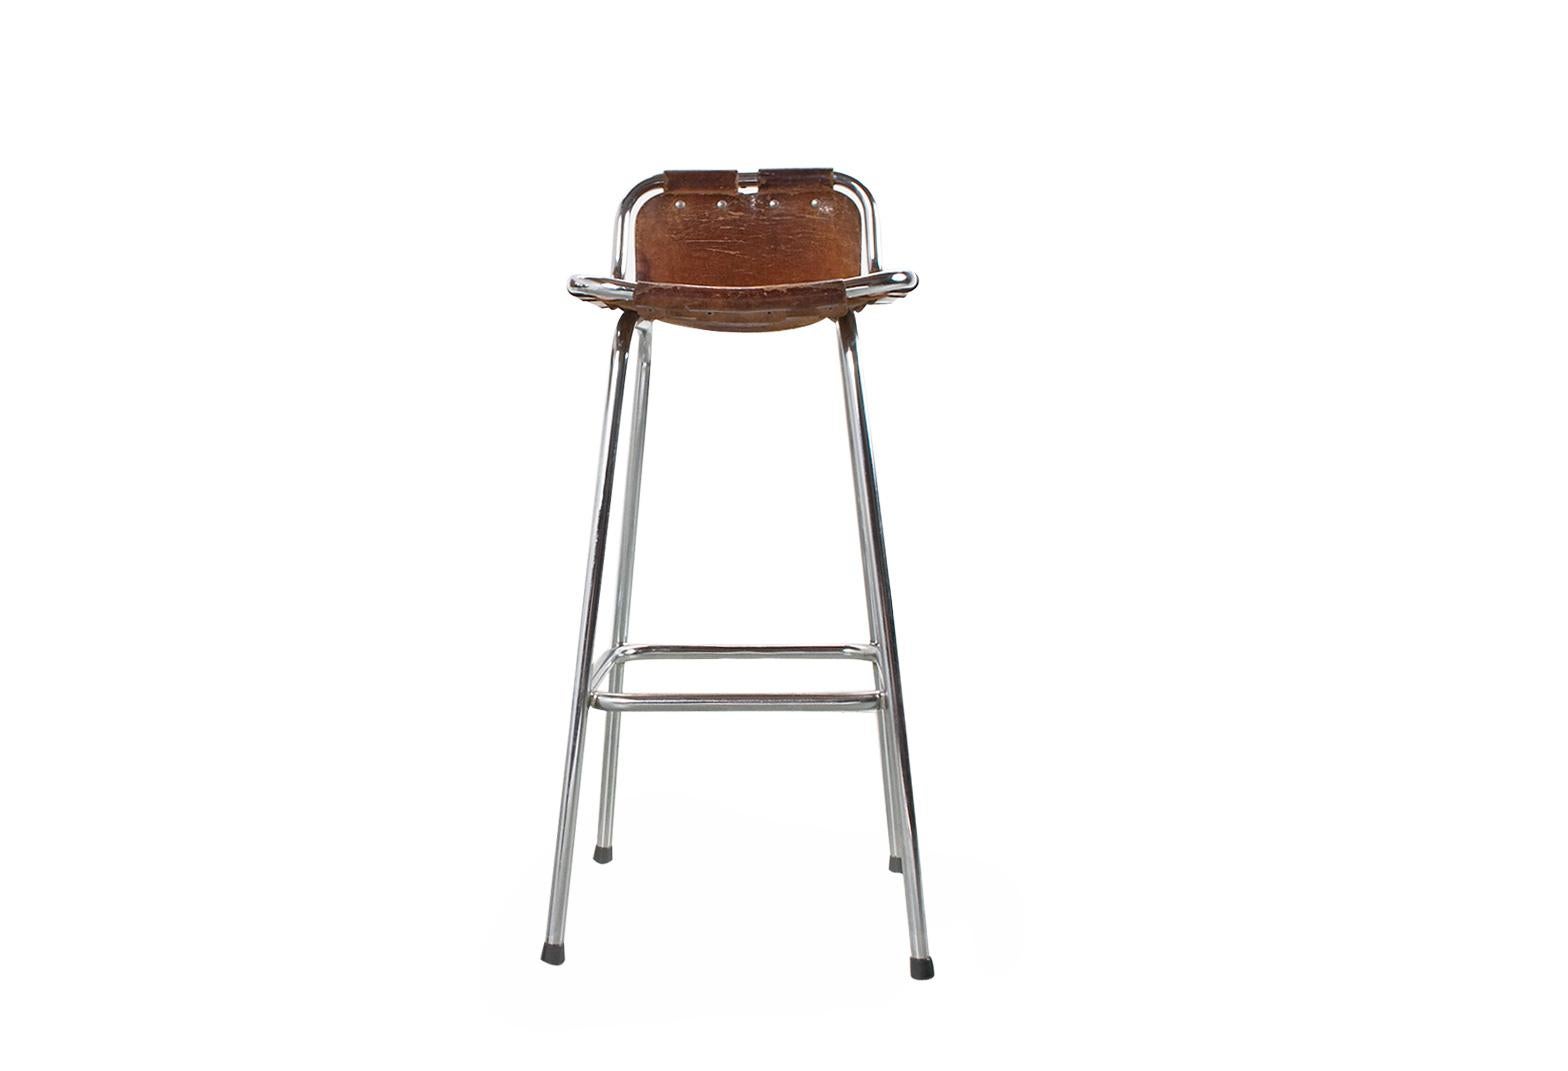 An original Mid-Century Modern French high bar stools with brown camel colored saddle leather sling seat, on a chromed tubular frame. Selected by Charlotte Perriand for the “Les Arcs” ski resort in France, 1960s. The chromed frame is in very good